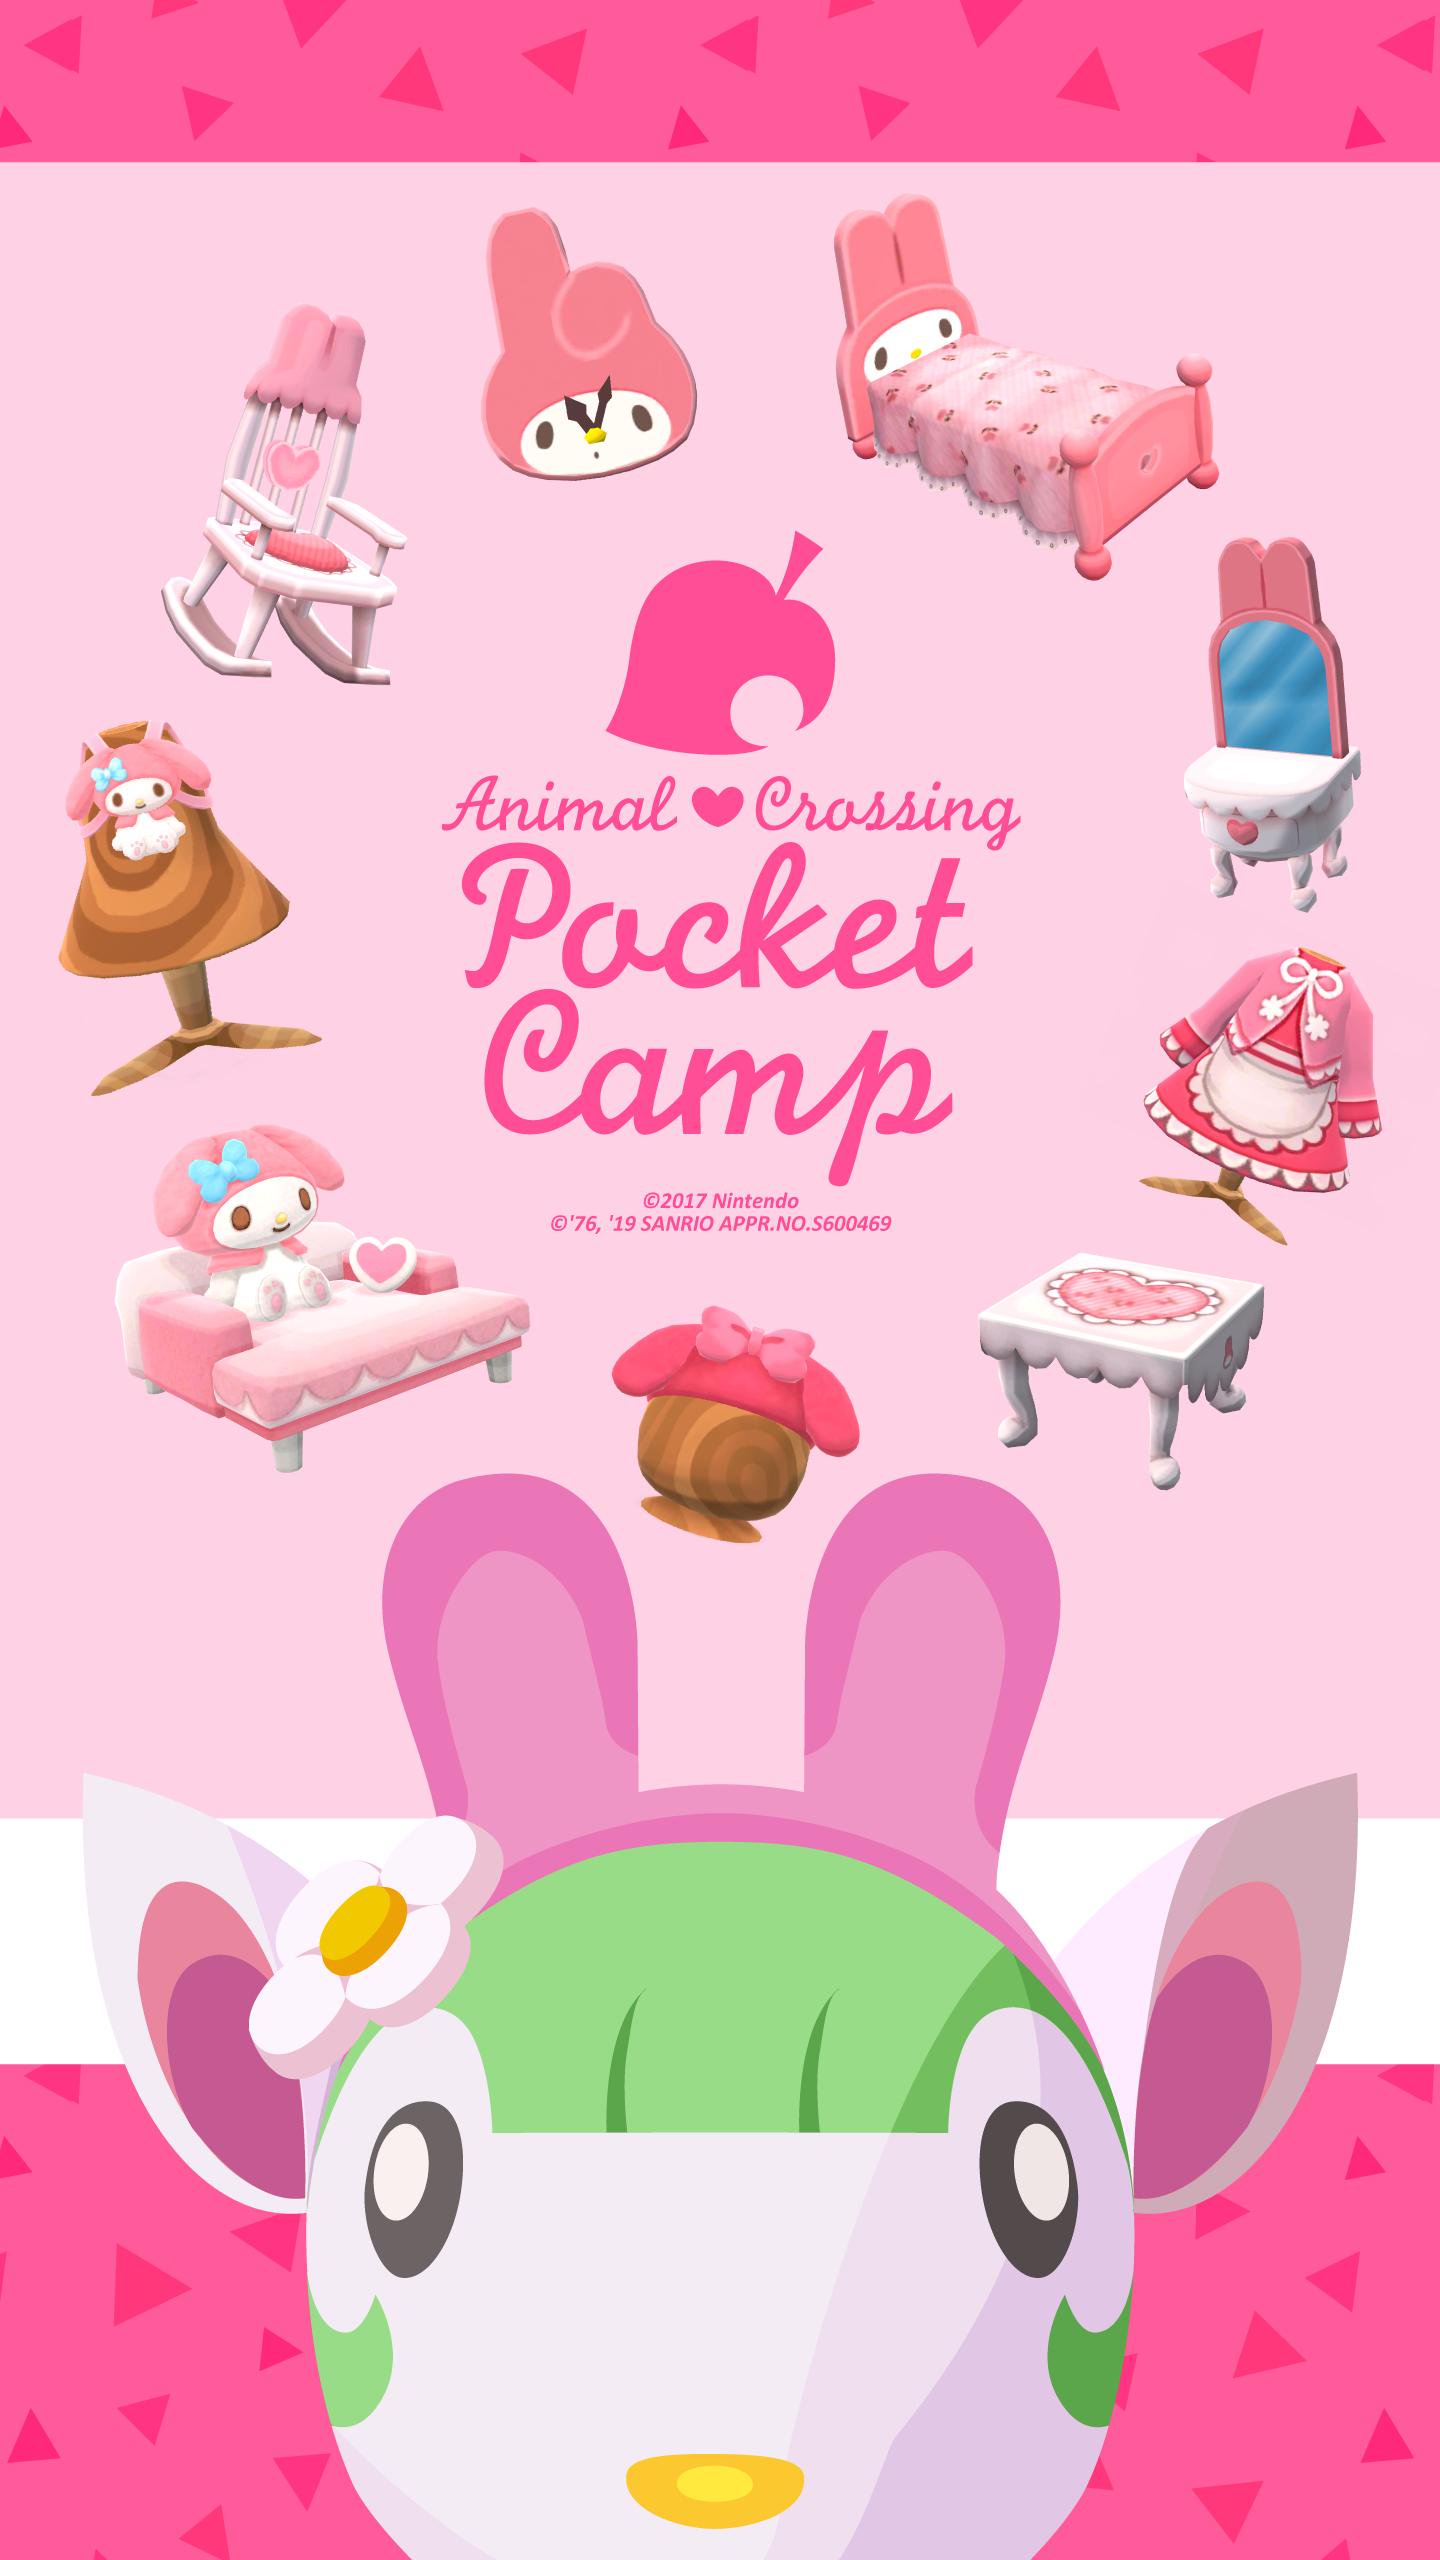 New wallpaper! Official set of Animal Crossing Sanrio phone wallpaper released, get them here Crossing World